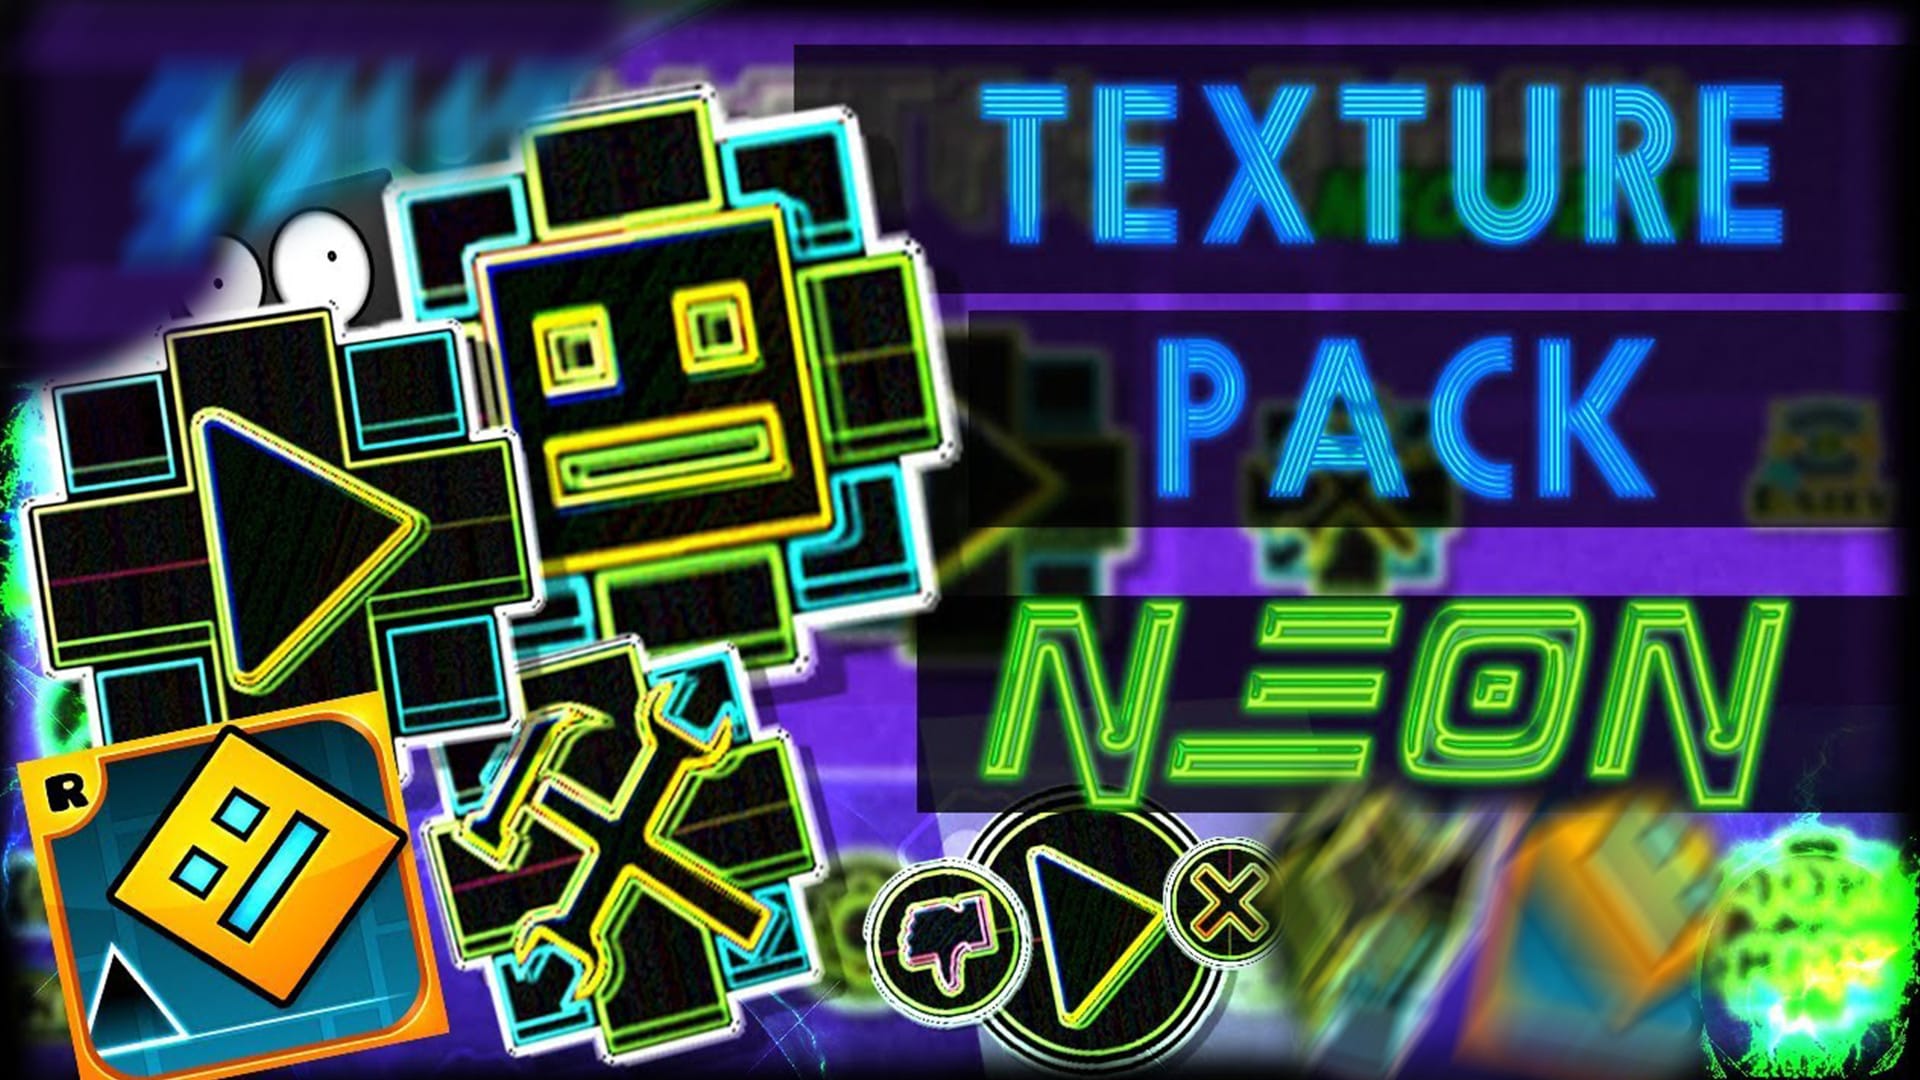 Android geometry dash texture pack Geometry dash